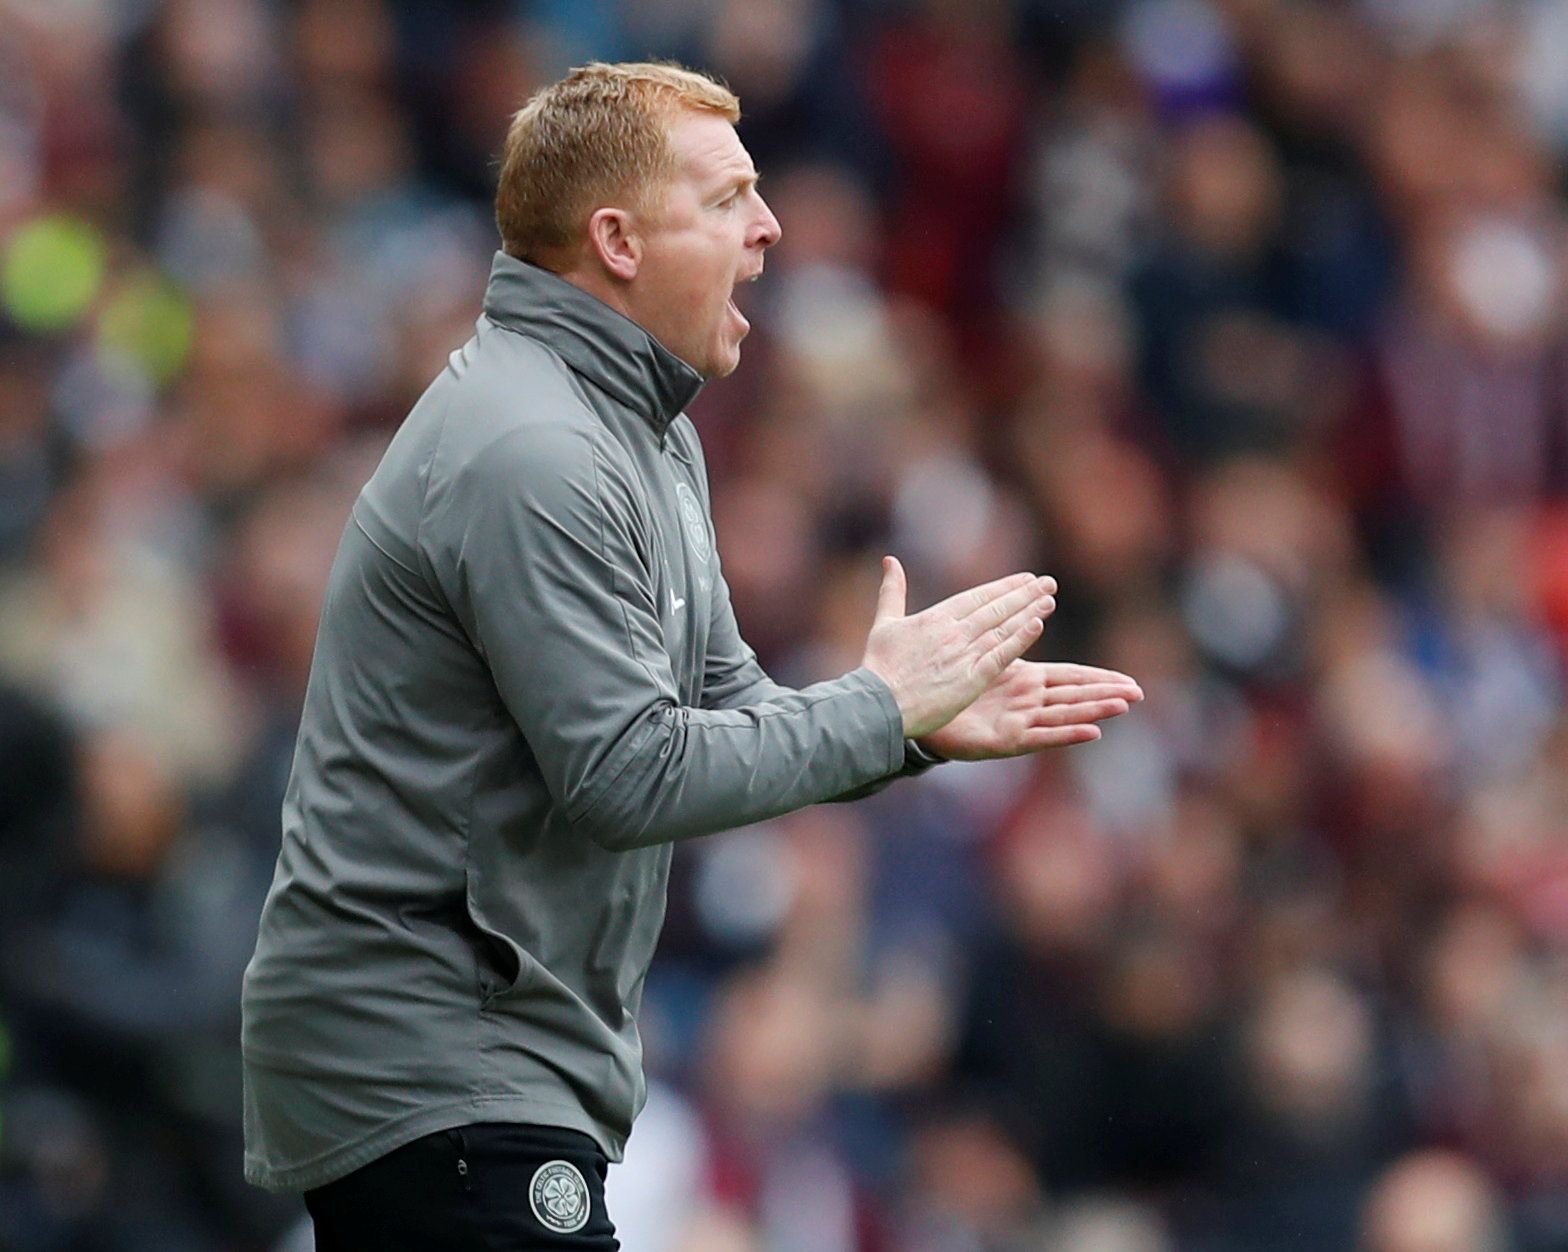 Soccer Football - Scottish Cup Final - Heart of Midlothian v Celtic - Hampden Park, Glasgow, Britain - May 25, 2019  Celtic manager Neil Lennon reacts during the match        REUTERS/Russell Cheyne